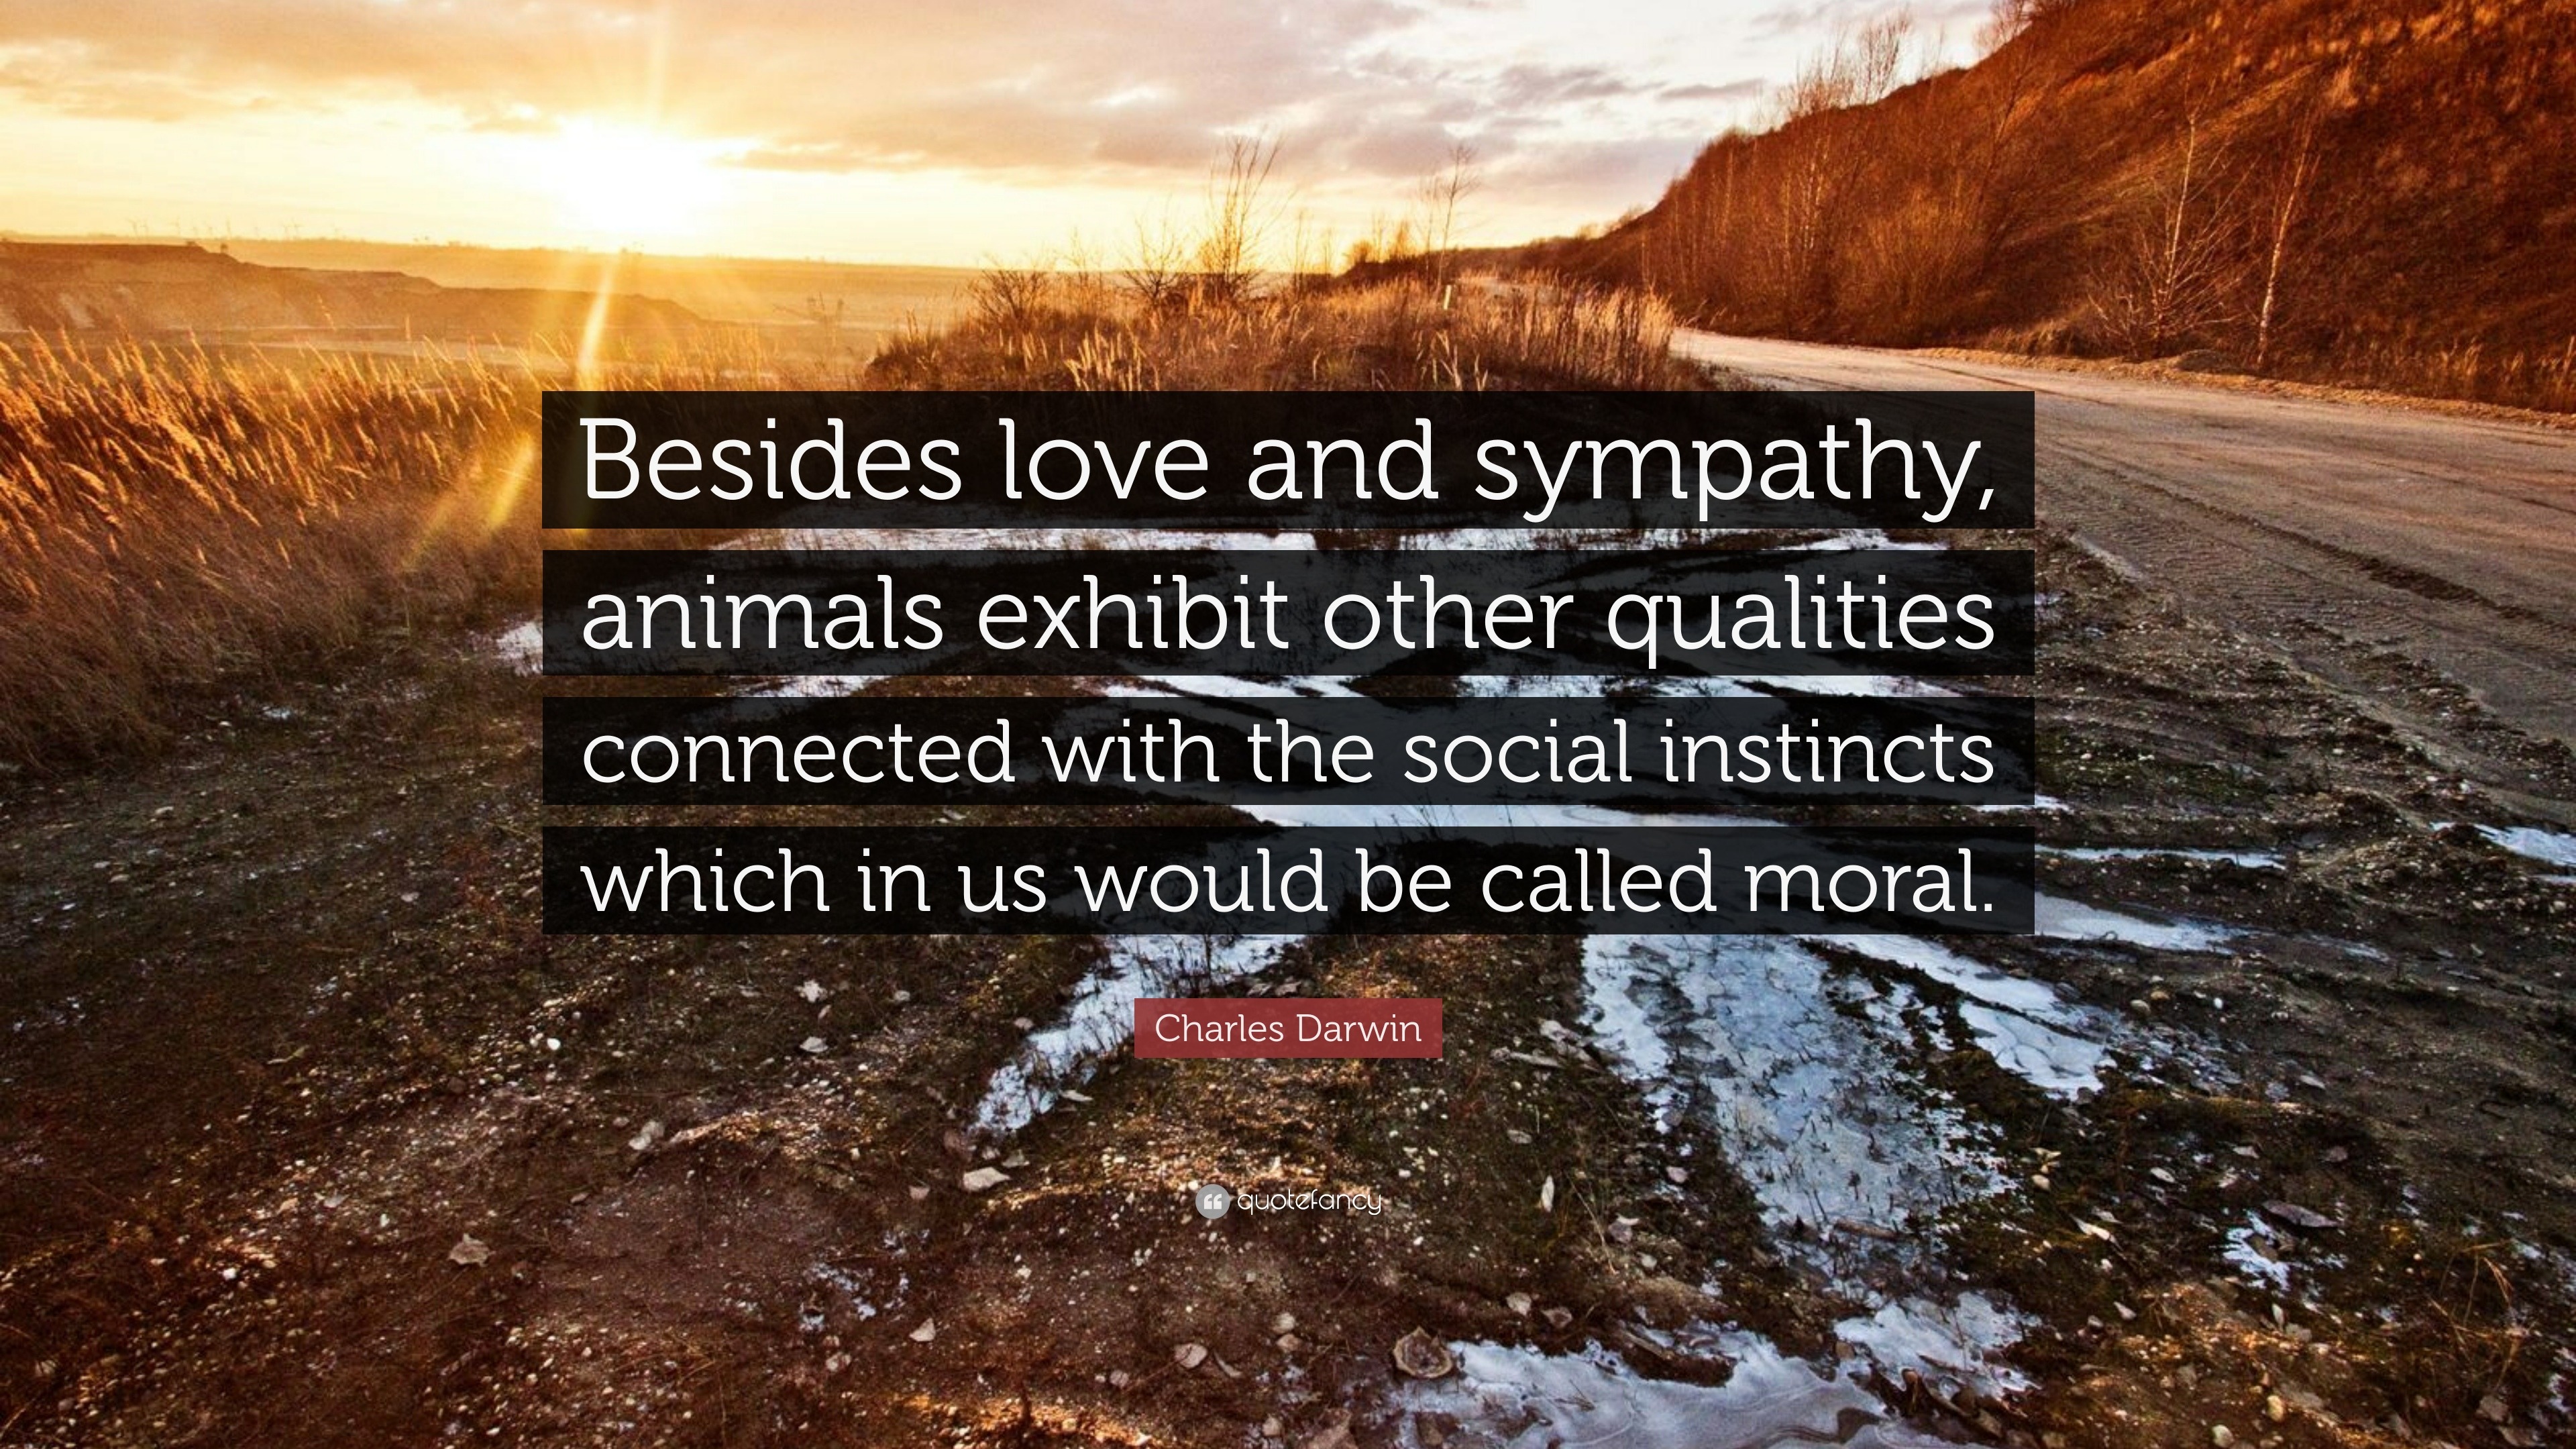 Charles Darwin Quote: “Besides love and sympathy, animals exhibit other  qualities connected with the social instincts which in us would be call...”